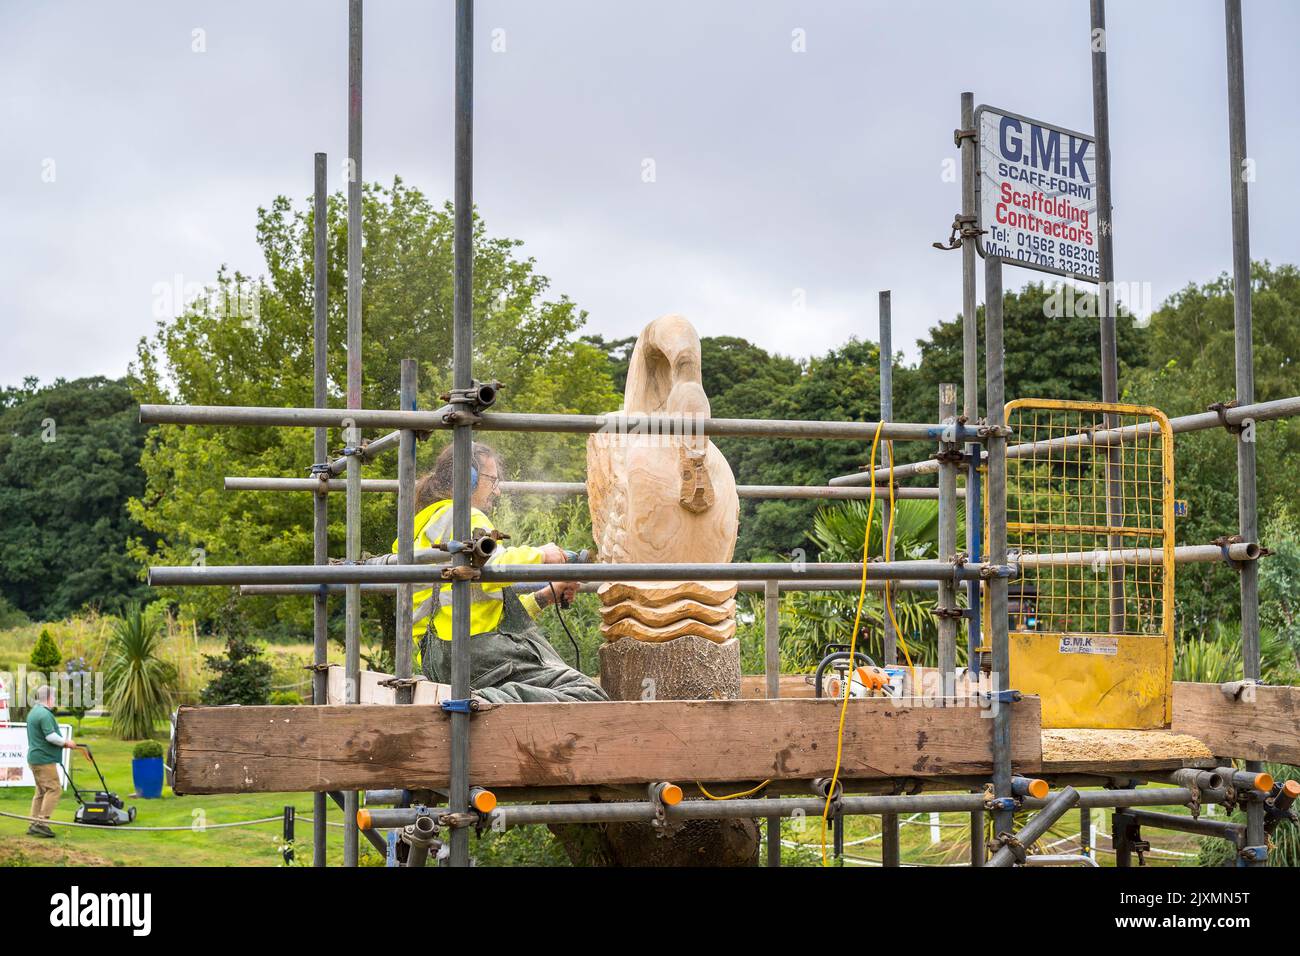 Swan carving by hand using a tree trunk on a public path. Power tools are used to carve and refine the shape of the swan. The workman works on an encl Stock Photo